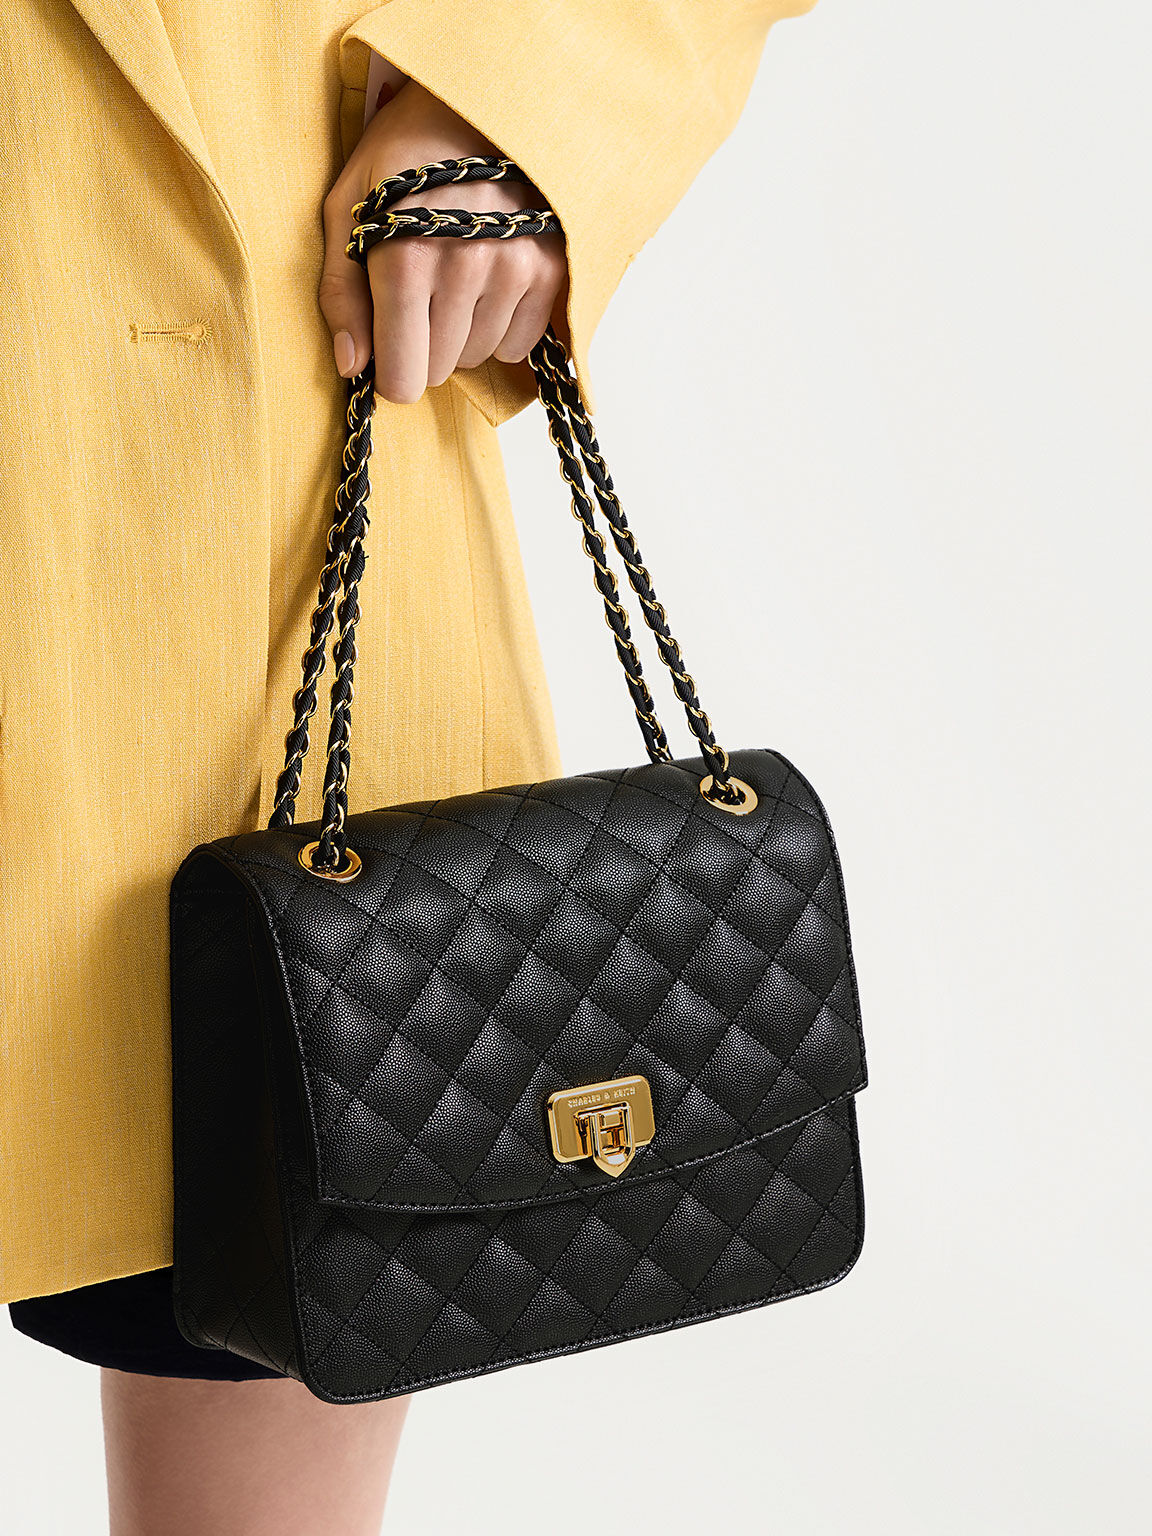 Moschino quilted black calfskin Gold chain strap purse | Connect Japan  Luxury